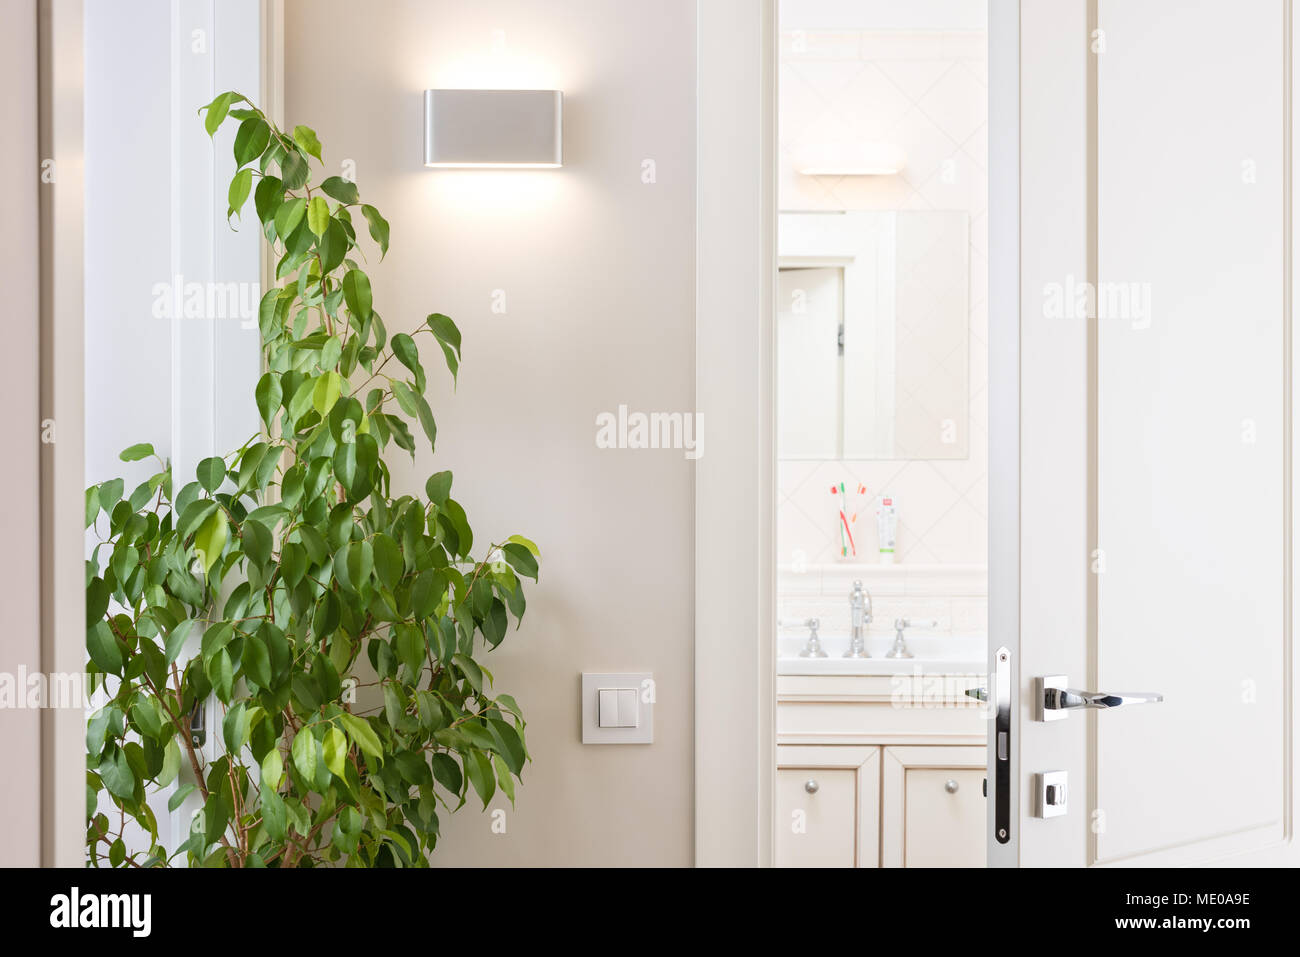 Ajar white door in the bright bathroom. Series switch and modern wall lamp on light gray wall. Chrome door handle and lock. Green houseplant Stock Photo